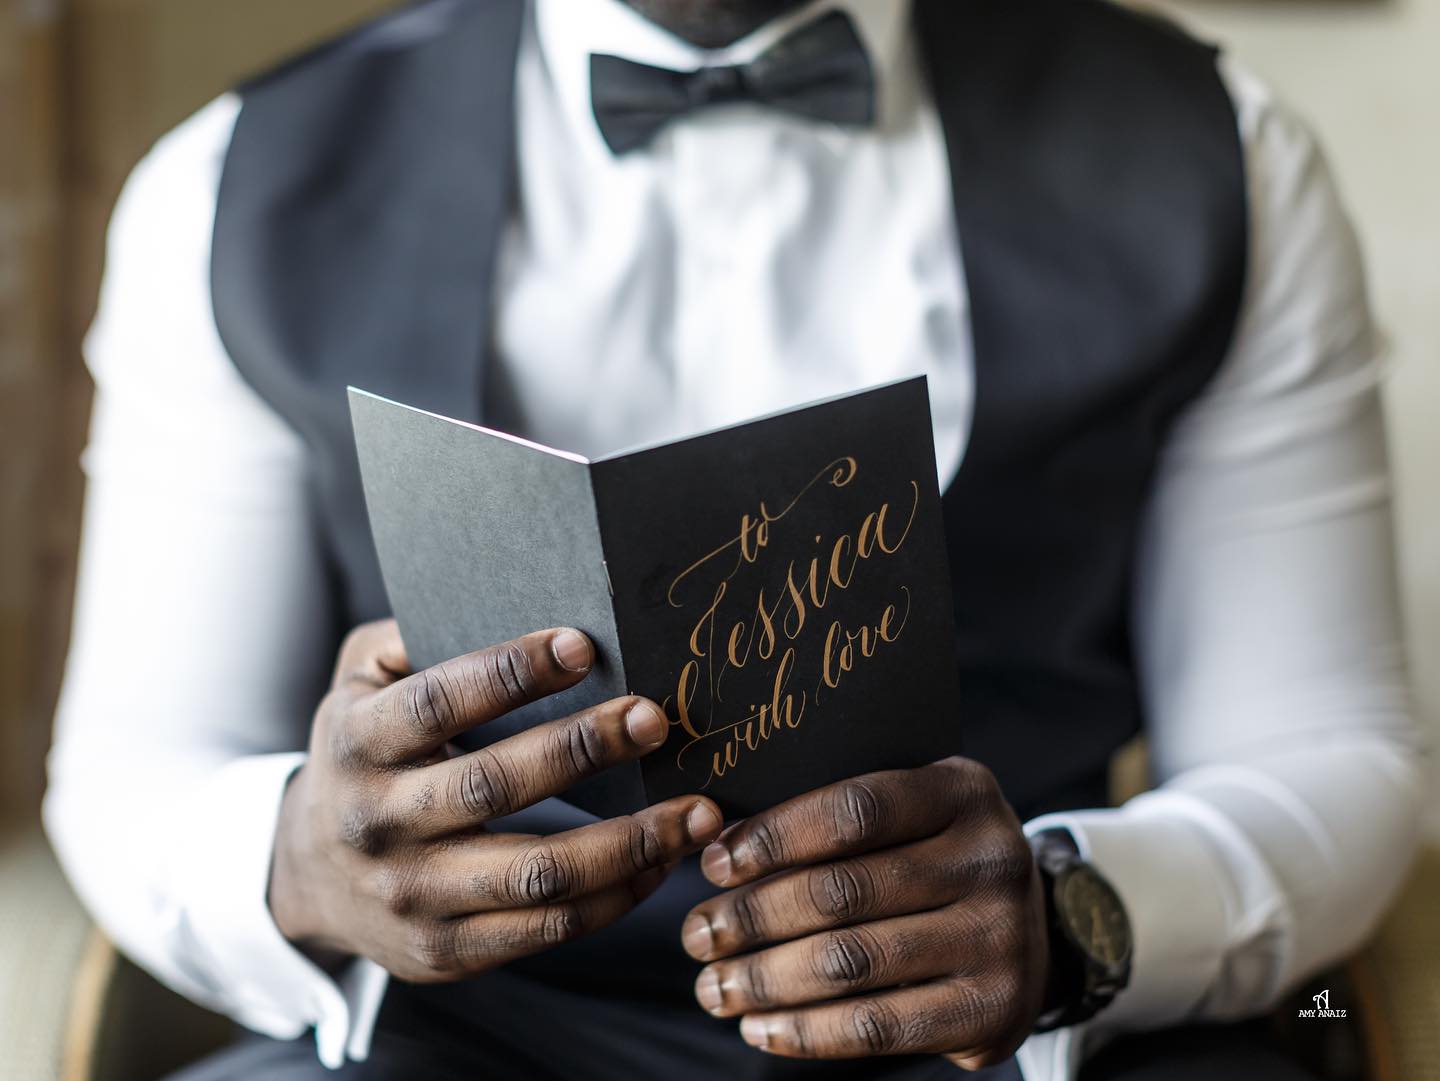 Are you planning to write your own vows or keeping it traditional? Tell me why? ? (Past couples would love your thoughts too) 

Vow Books by @bydamistudiosnyc